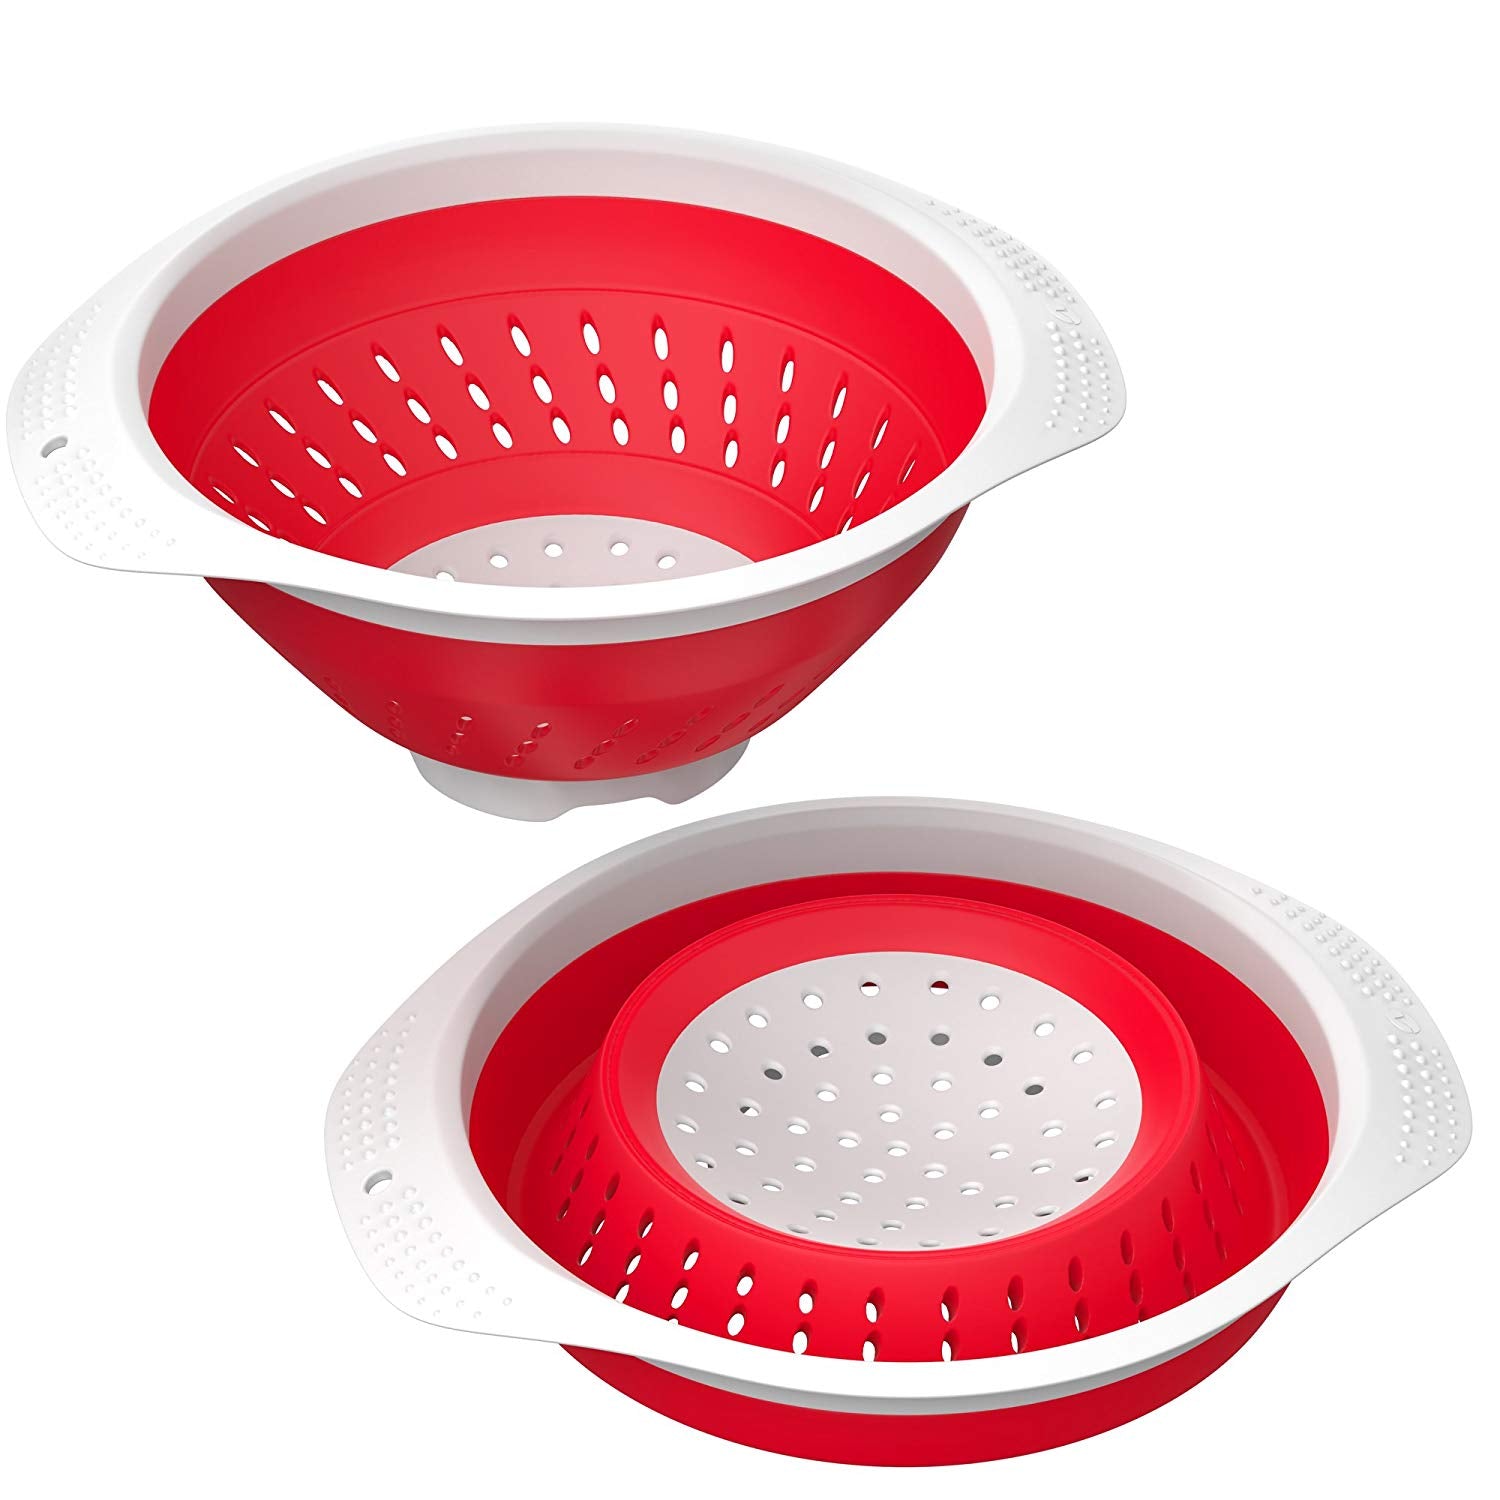 Vremi 5 Quart Collapsible Colander - BPA Free Silicone Food Strainer with Plastic Handles - Heavy Duty Foldable Heat Resistant Pasta and Veggies Kitchen Drainer Steam Basket - Dishwasher Safe - Red